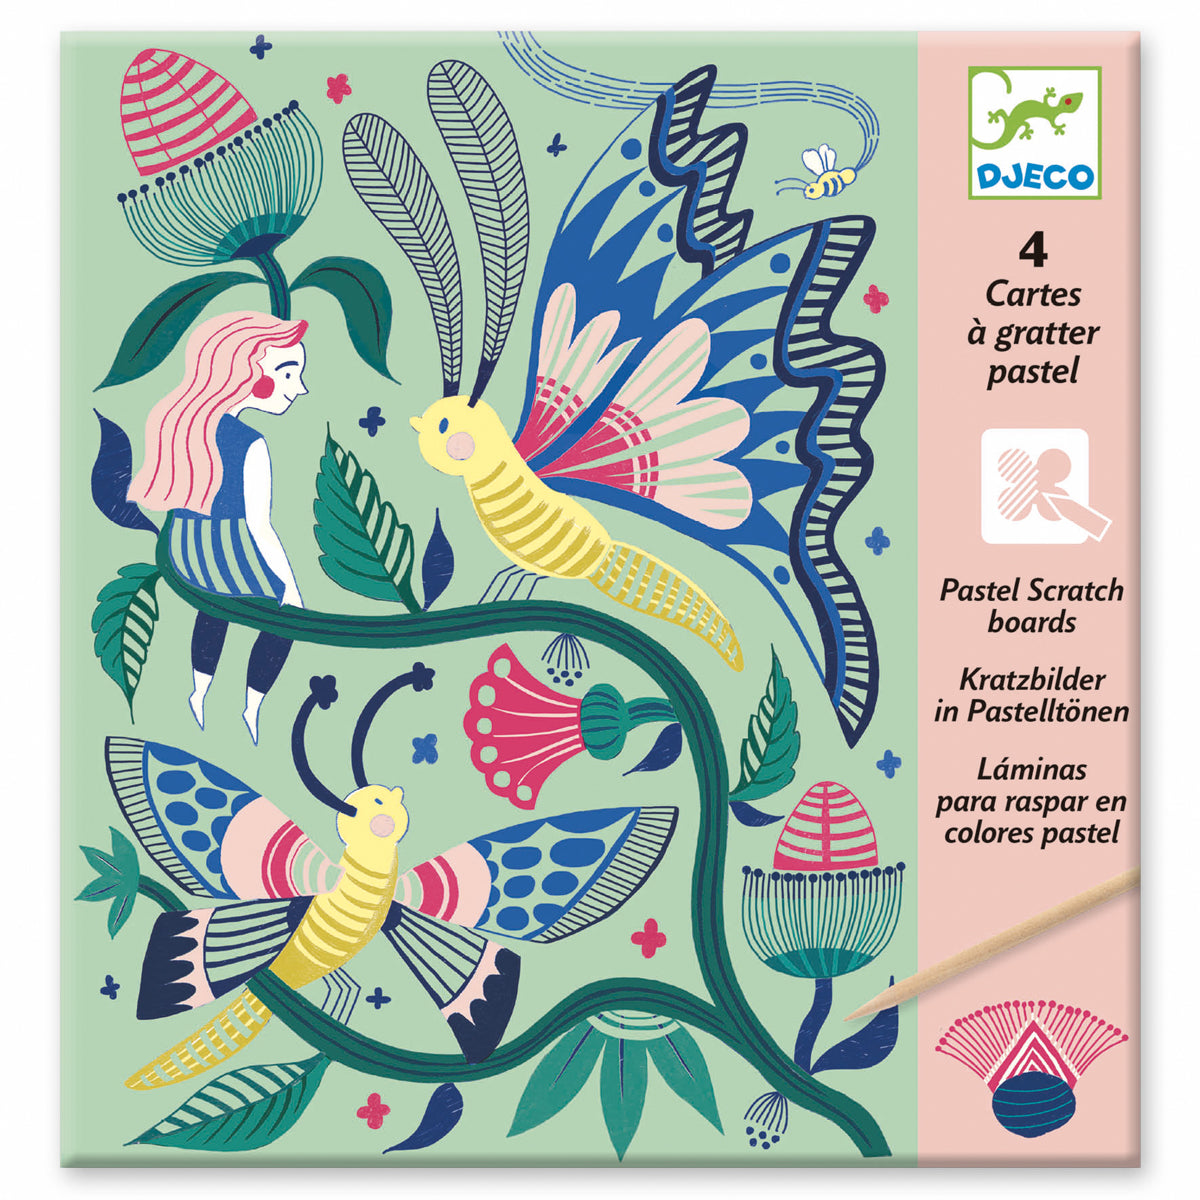 Pastel Scratch Cards Djeco Fantasy Garden small gifts 3-6 years